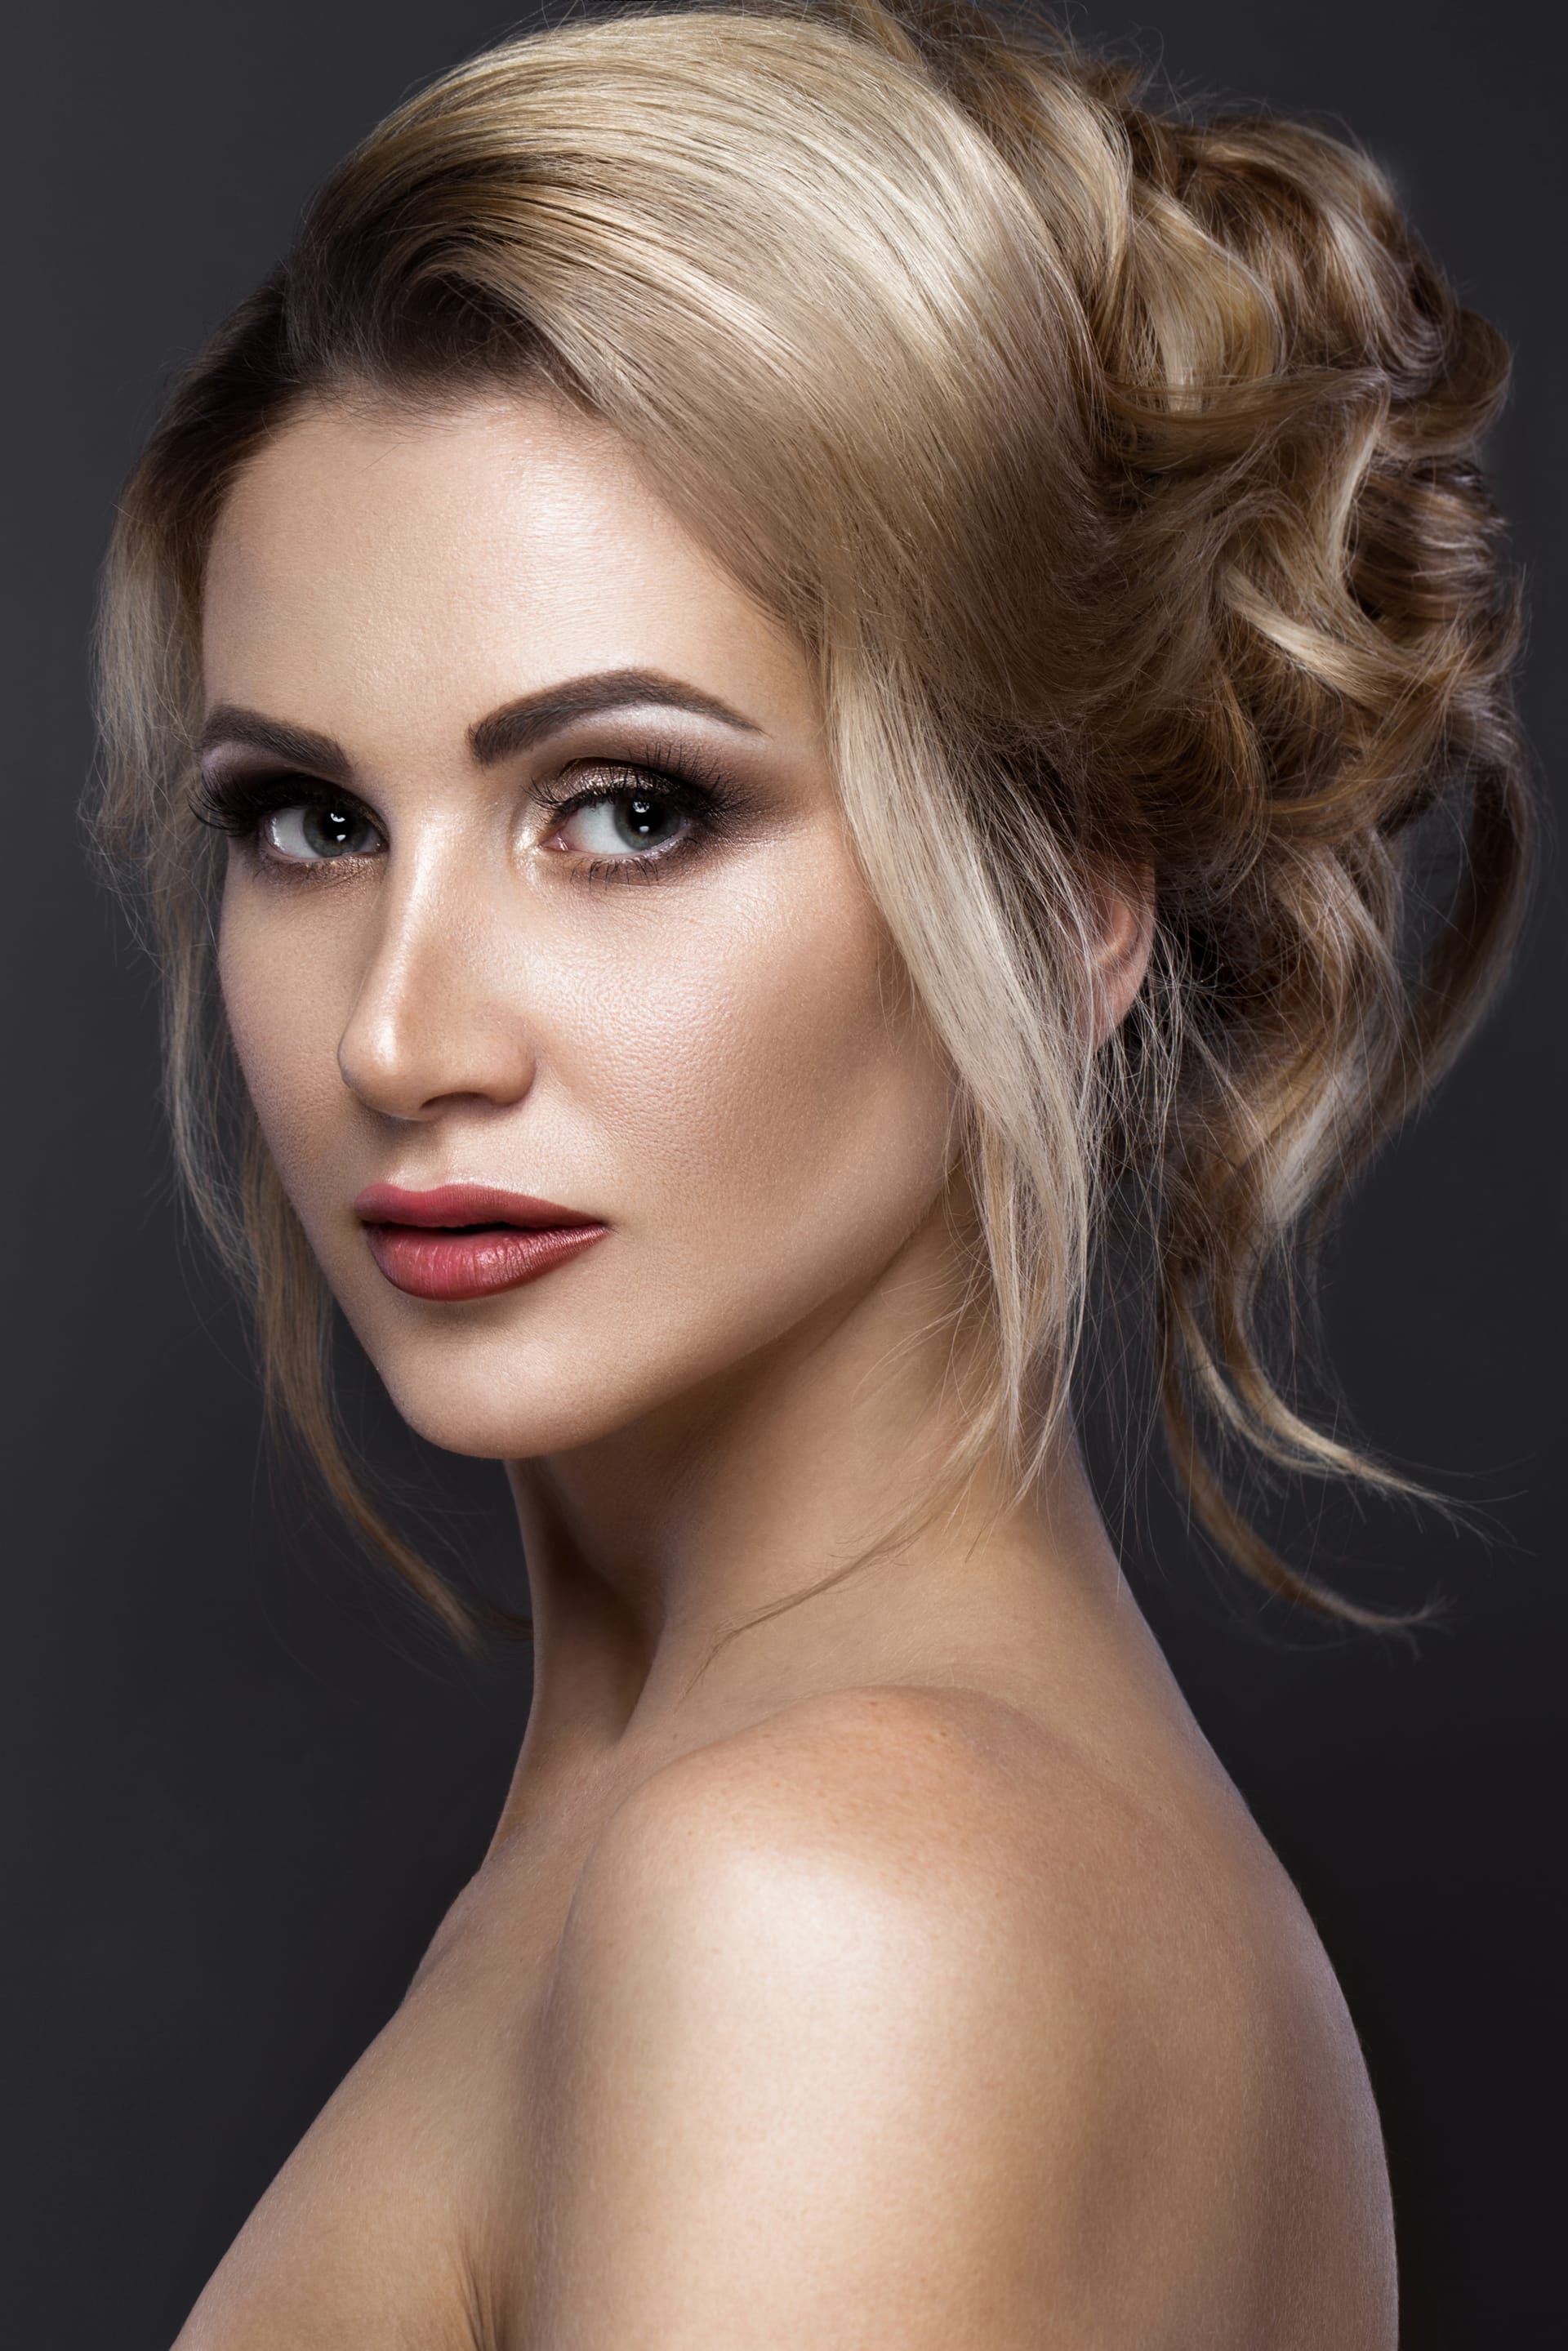 Woman with perfect skin evening make up wedding hairstyle